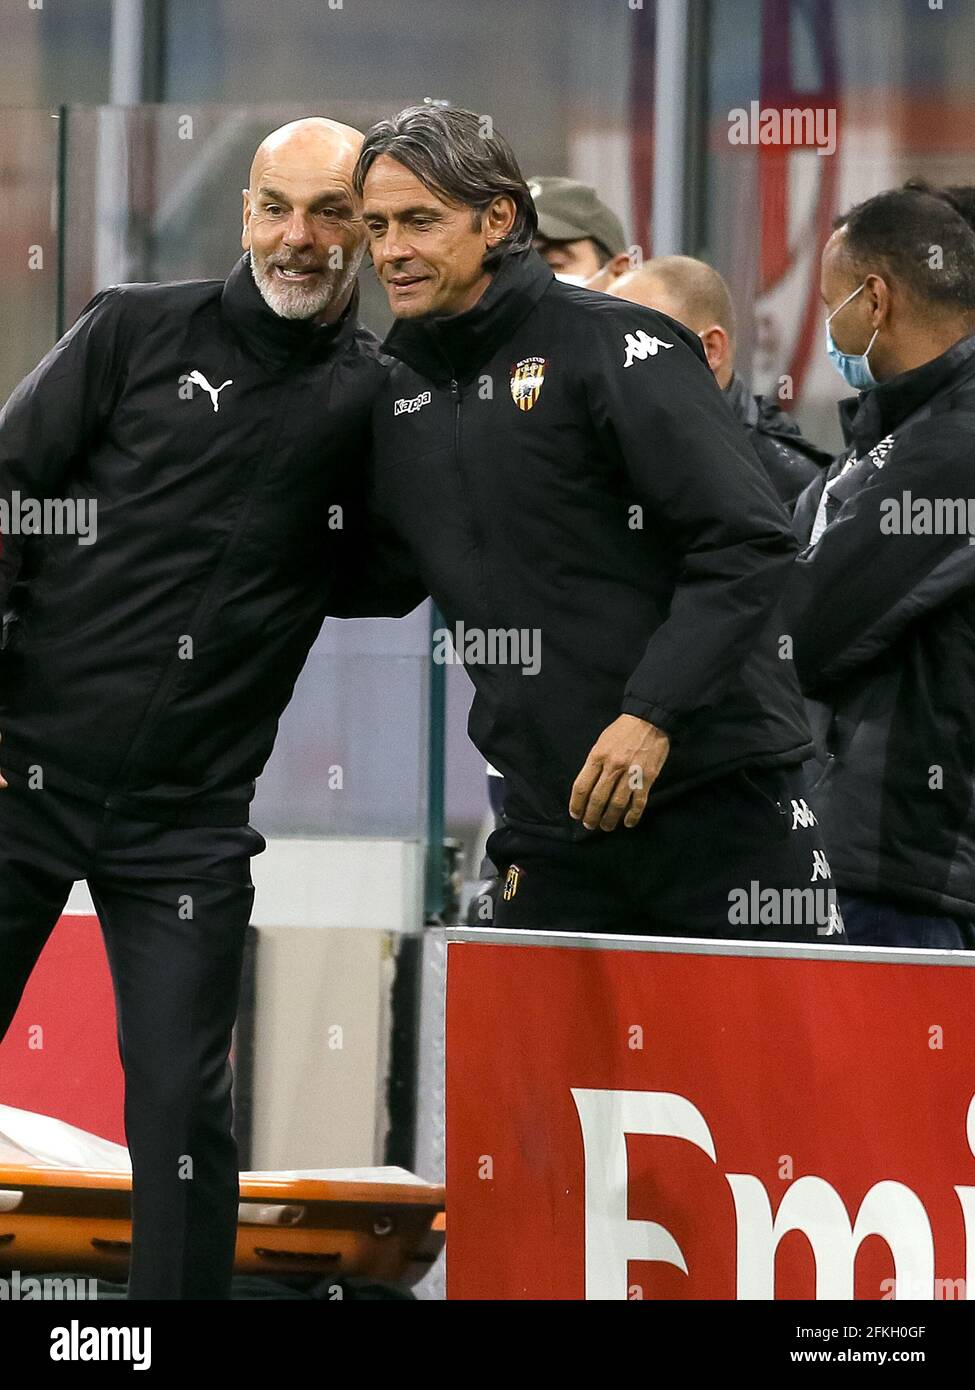 MILAN, ITALY - MAY 1: coach Stefano Pioli of AC Milan and coach Filippo Inzaghi of Benevento during the Serie A match between AC Milan and Benevento at Stadio Giuseppe Meazza on May 1, 2021 in Milan, Italy (Photo by Ciro Santangelo/Orange Pictures) Stock Photo